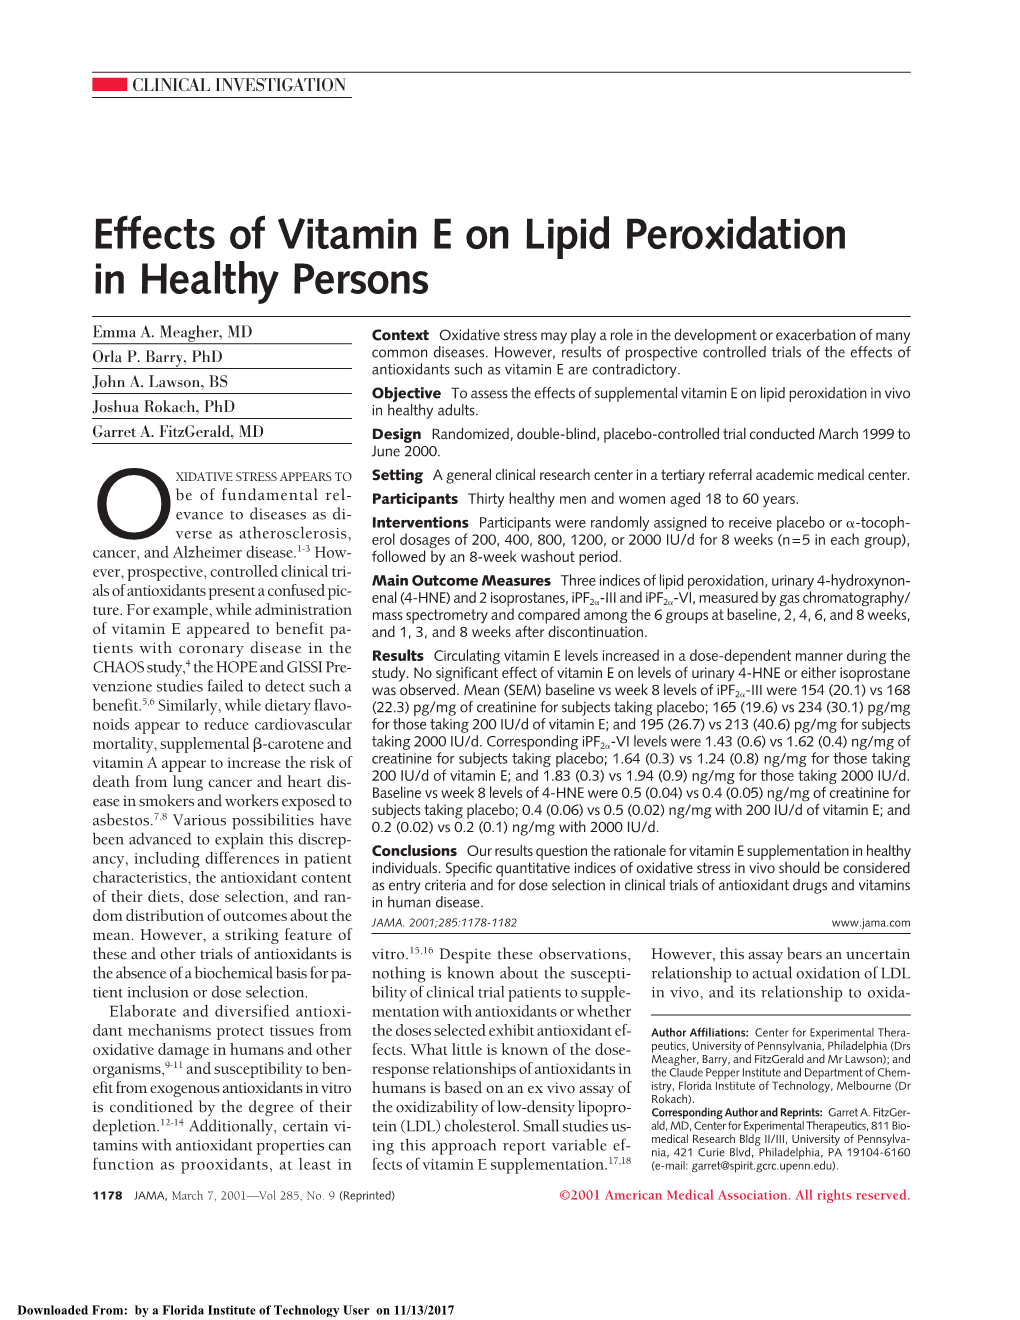 Effects of Vitamin E on Lipid Peroxidation in Healthy Persons